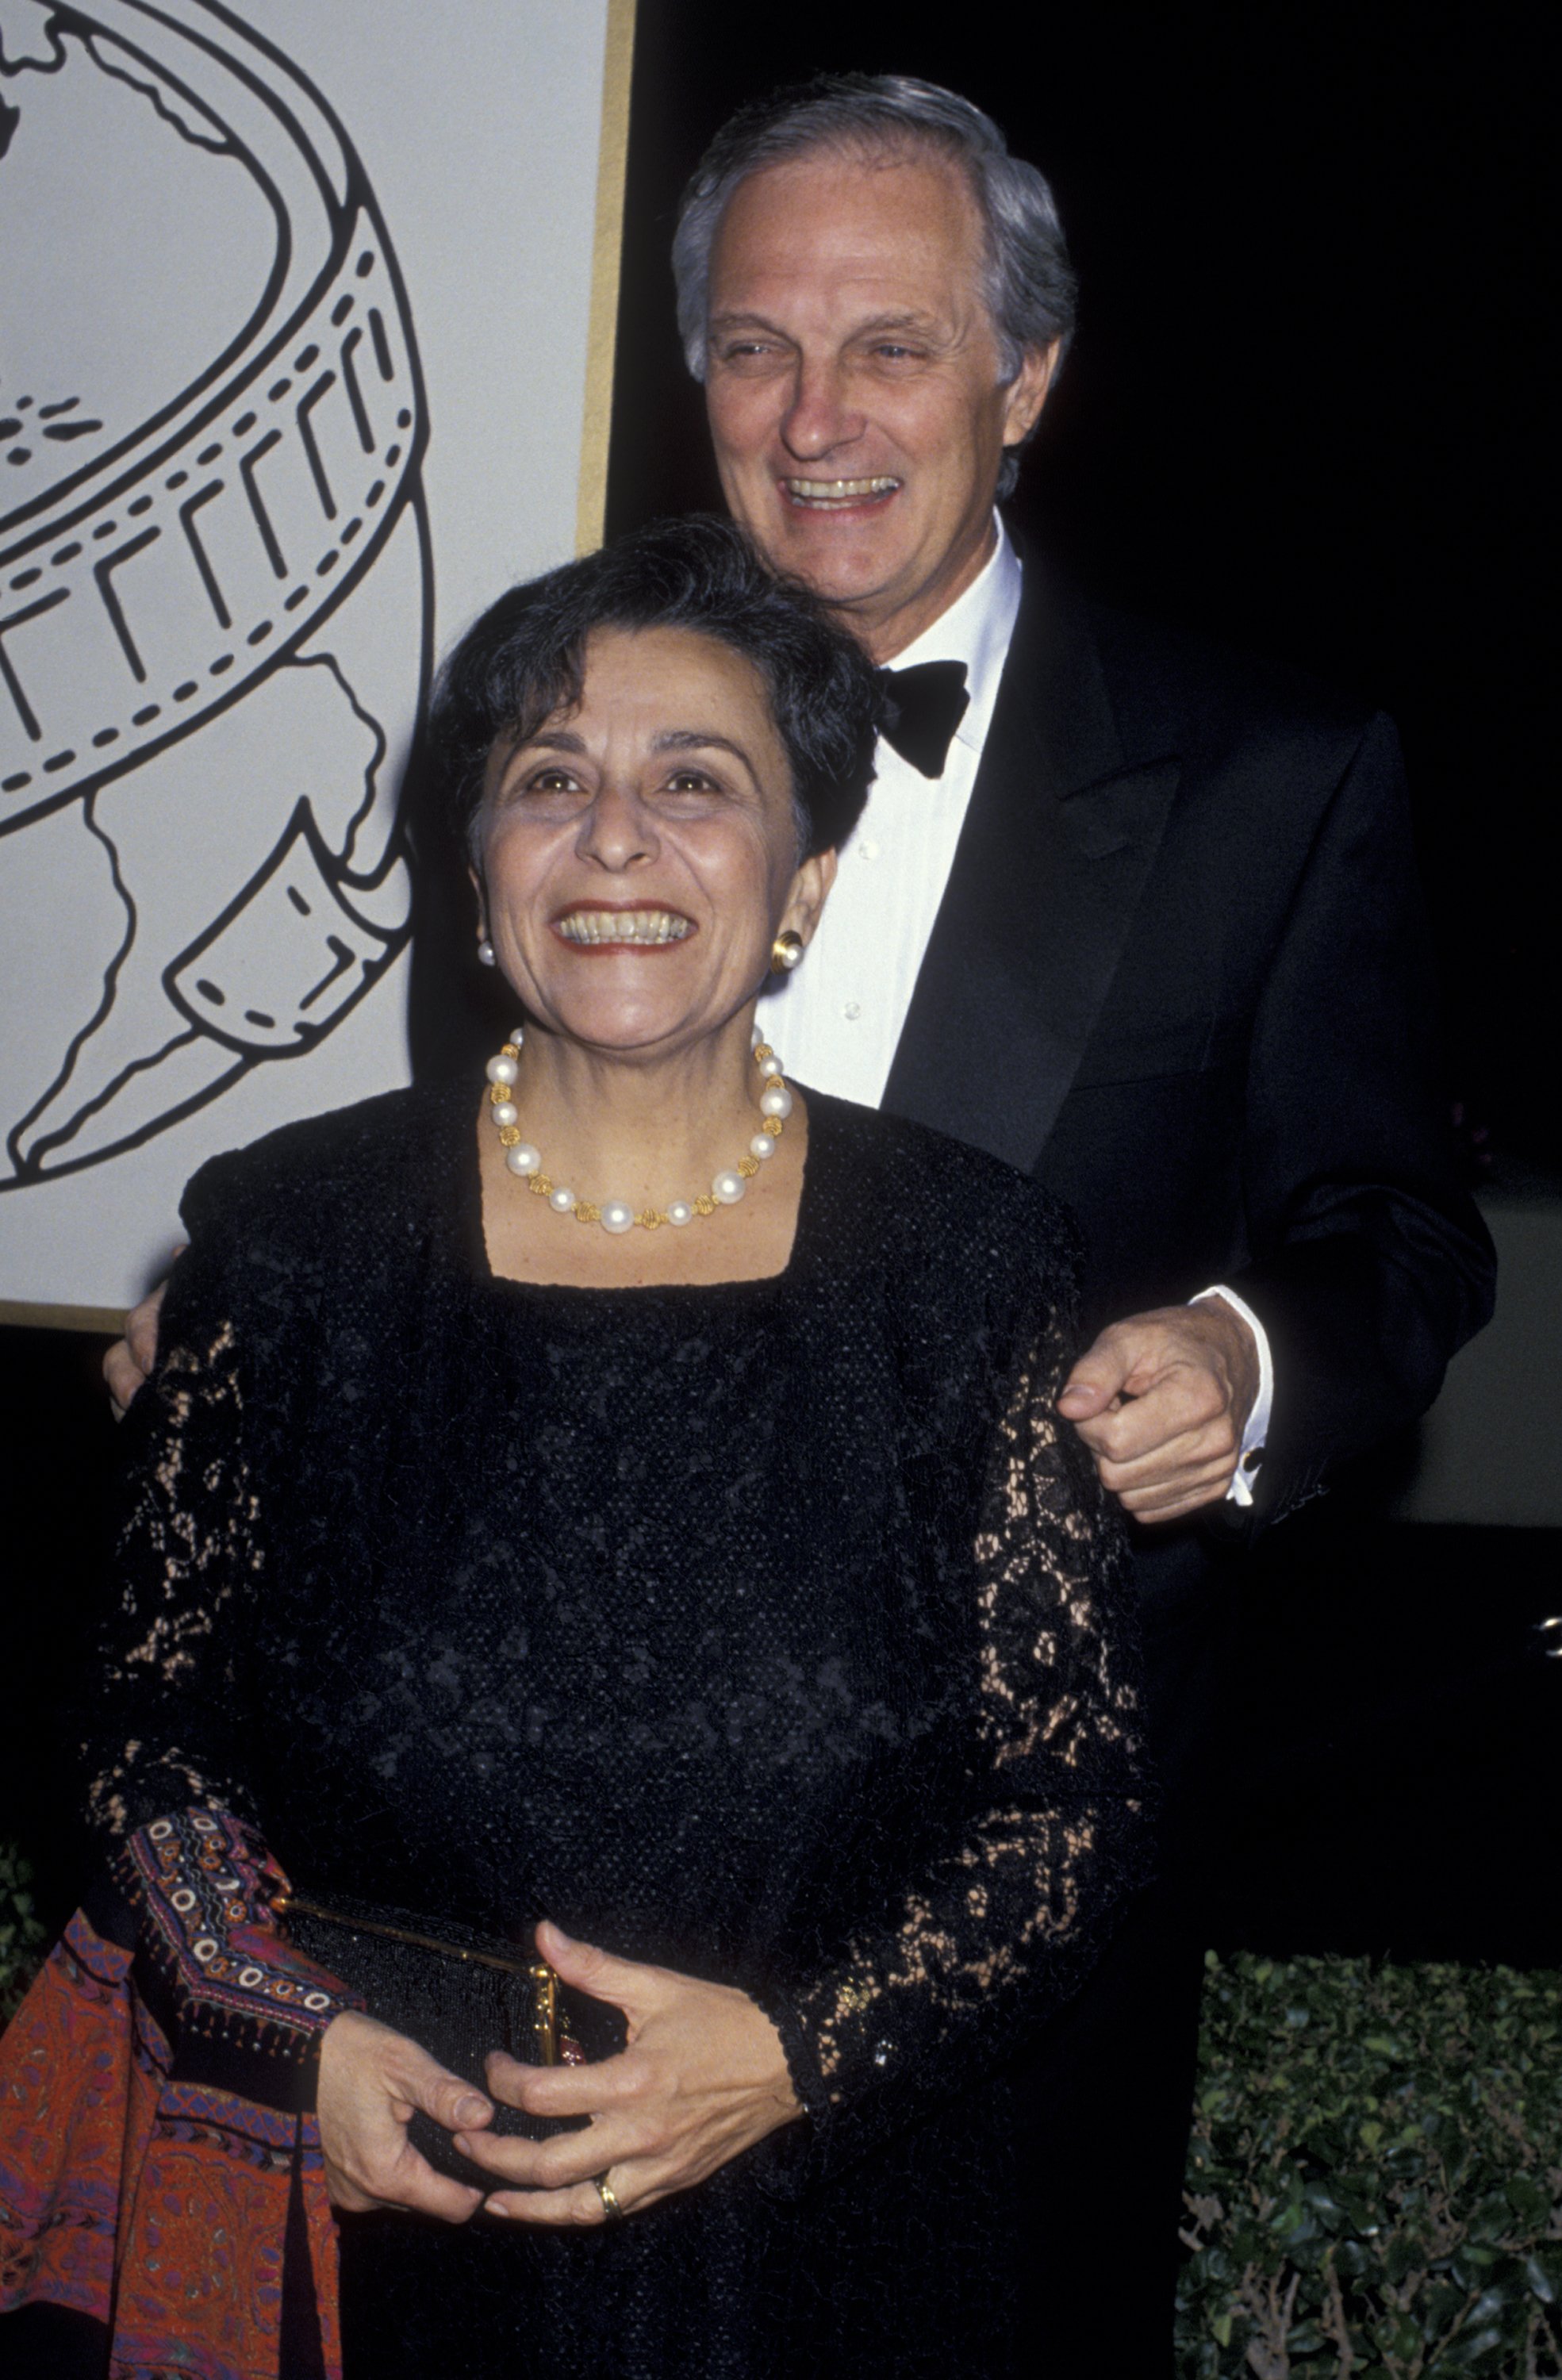 Alan Alda and Arlene Weiss attend the 52nd Annual Golden Globe Awards at the Beverly Hilton Hotel on January 21, 1995 in Beverly Hills, California | Source: Getty Images